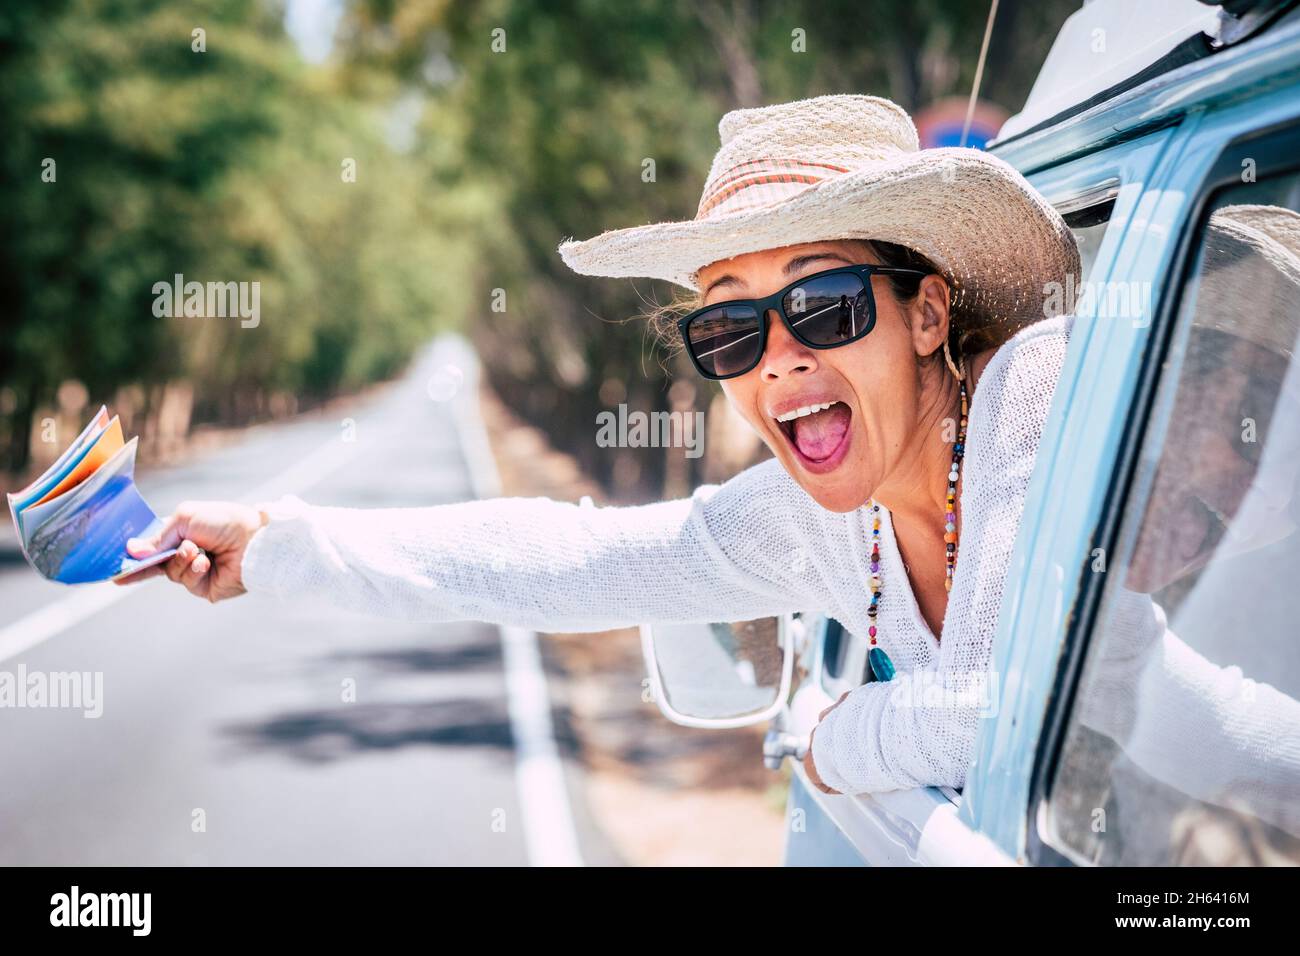 overjoyed adult pretty woman outside the window of her classic car with guida map on hand asking help or have fun - long road in background for travel adventure lifestyle people concept Stock Photo